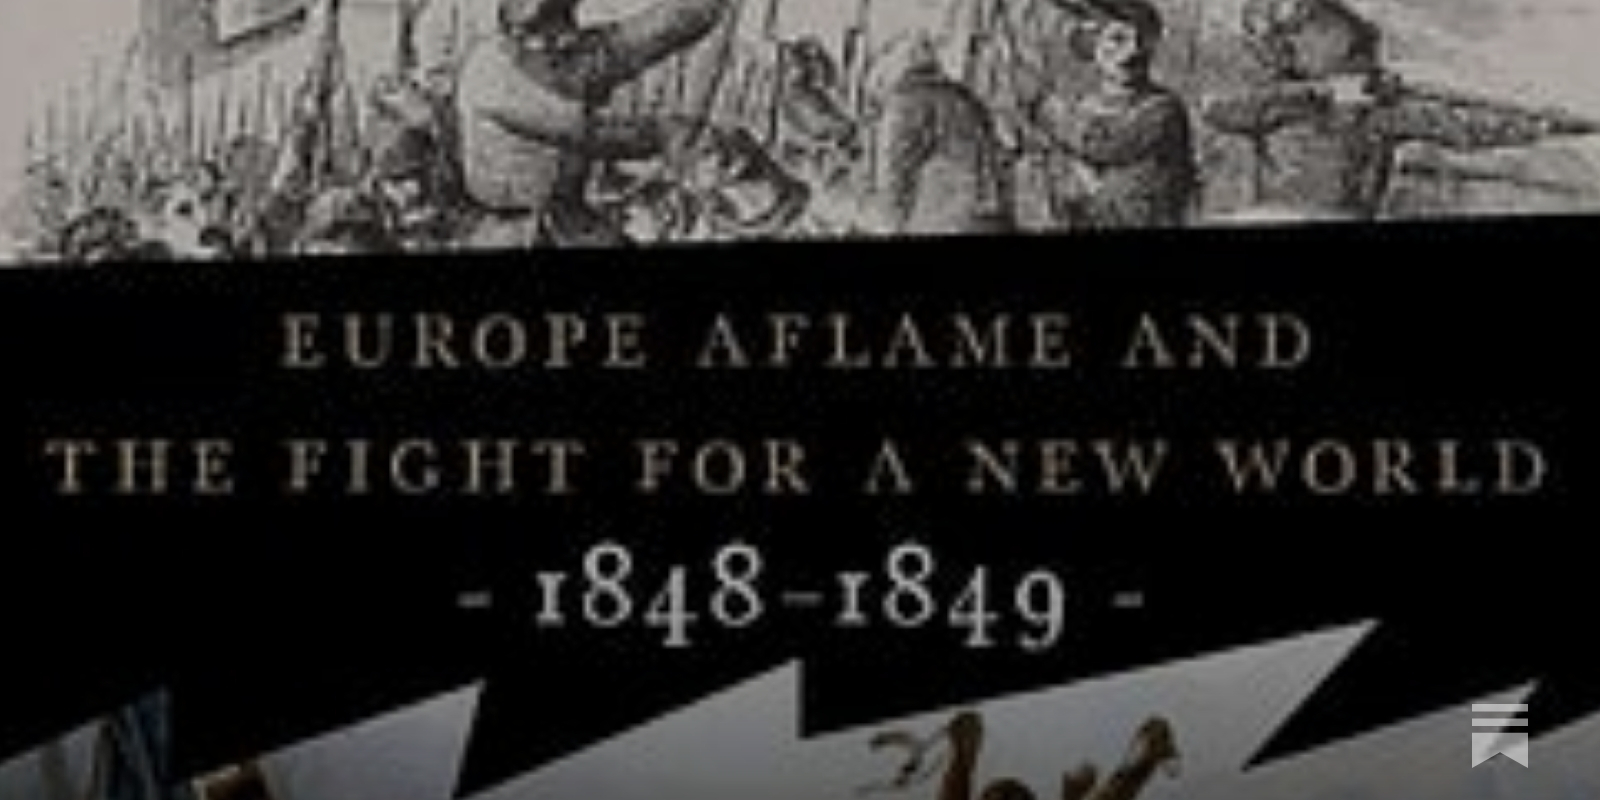 Revolutionary Spring: Europe Aflame and the Fight for a New World